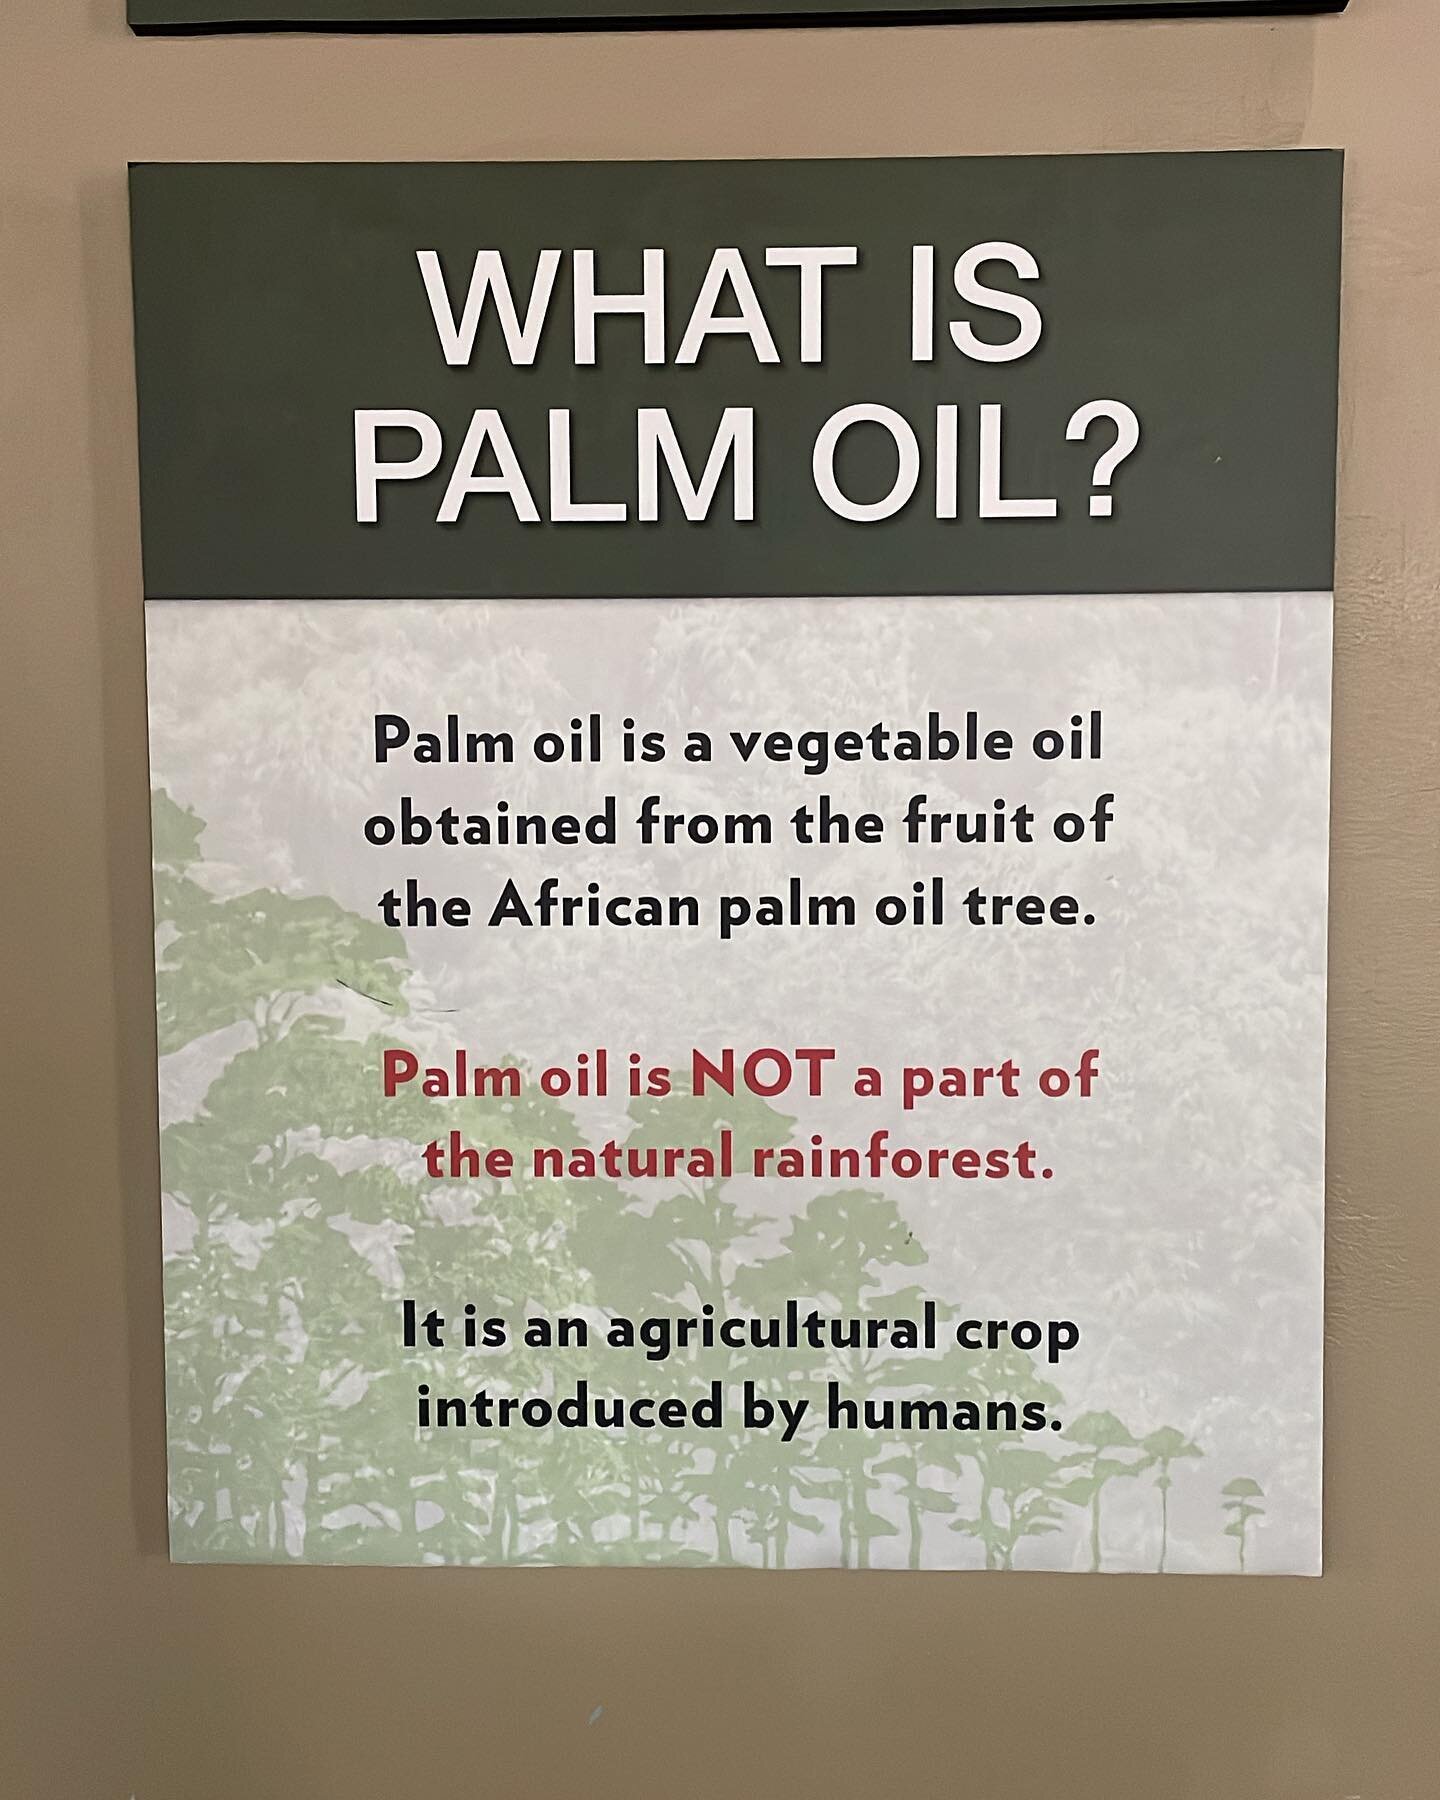 Small changes can make big differences. #palmoil